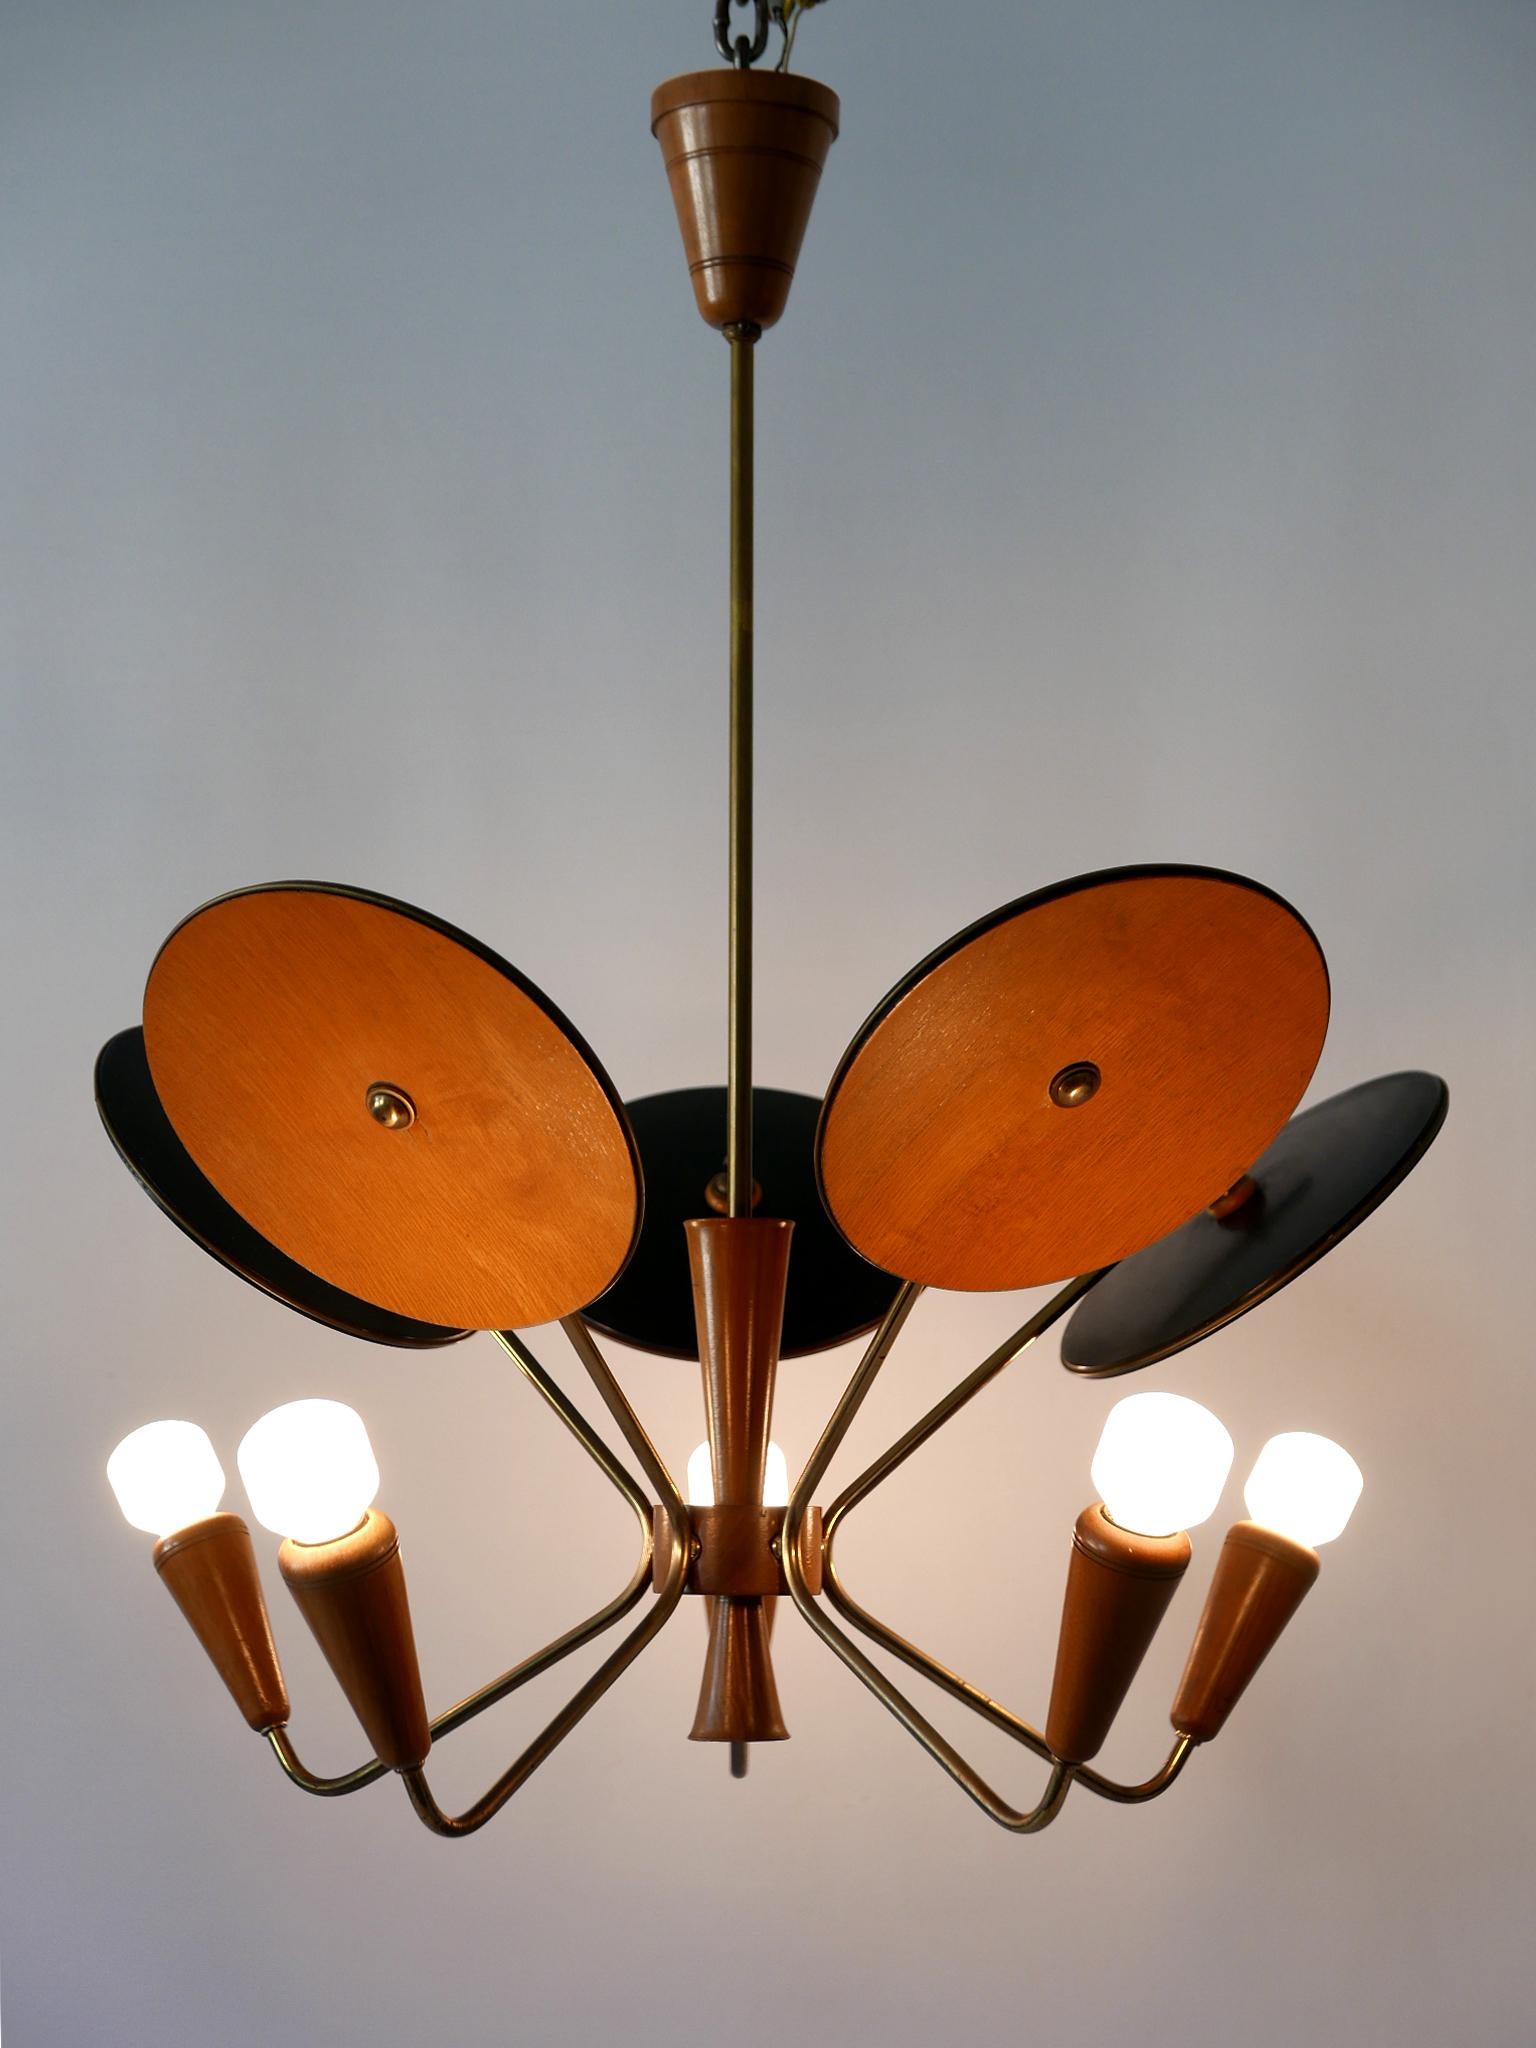 Extremely rare and highly decorative Mid-Century Modern five-armed sputnik chandelier or pendant lamp. Designed and manufactured probably in Germany, 1950s.

Executed in wood and brass, the lamp needs 5 x E14 / E12 Edison screw fit bulbs. It is